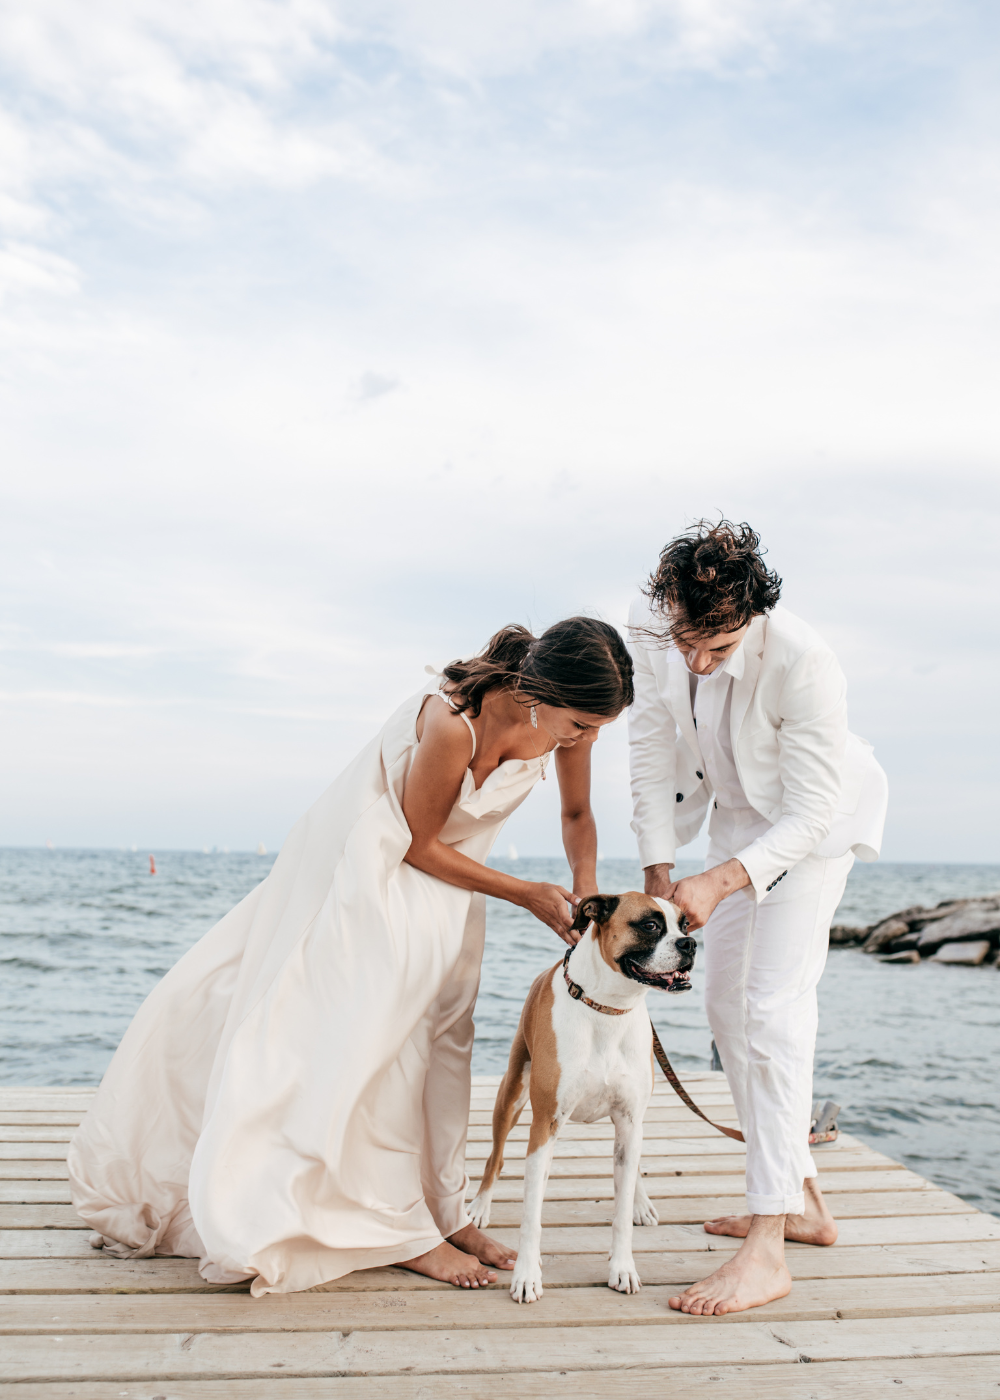 can my dog be a witness at my wedding: pet 6